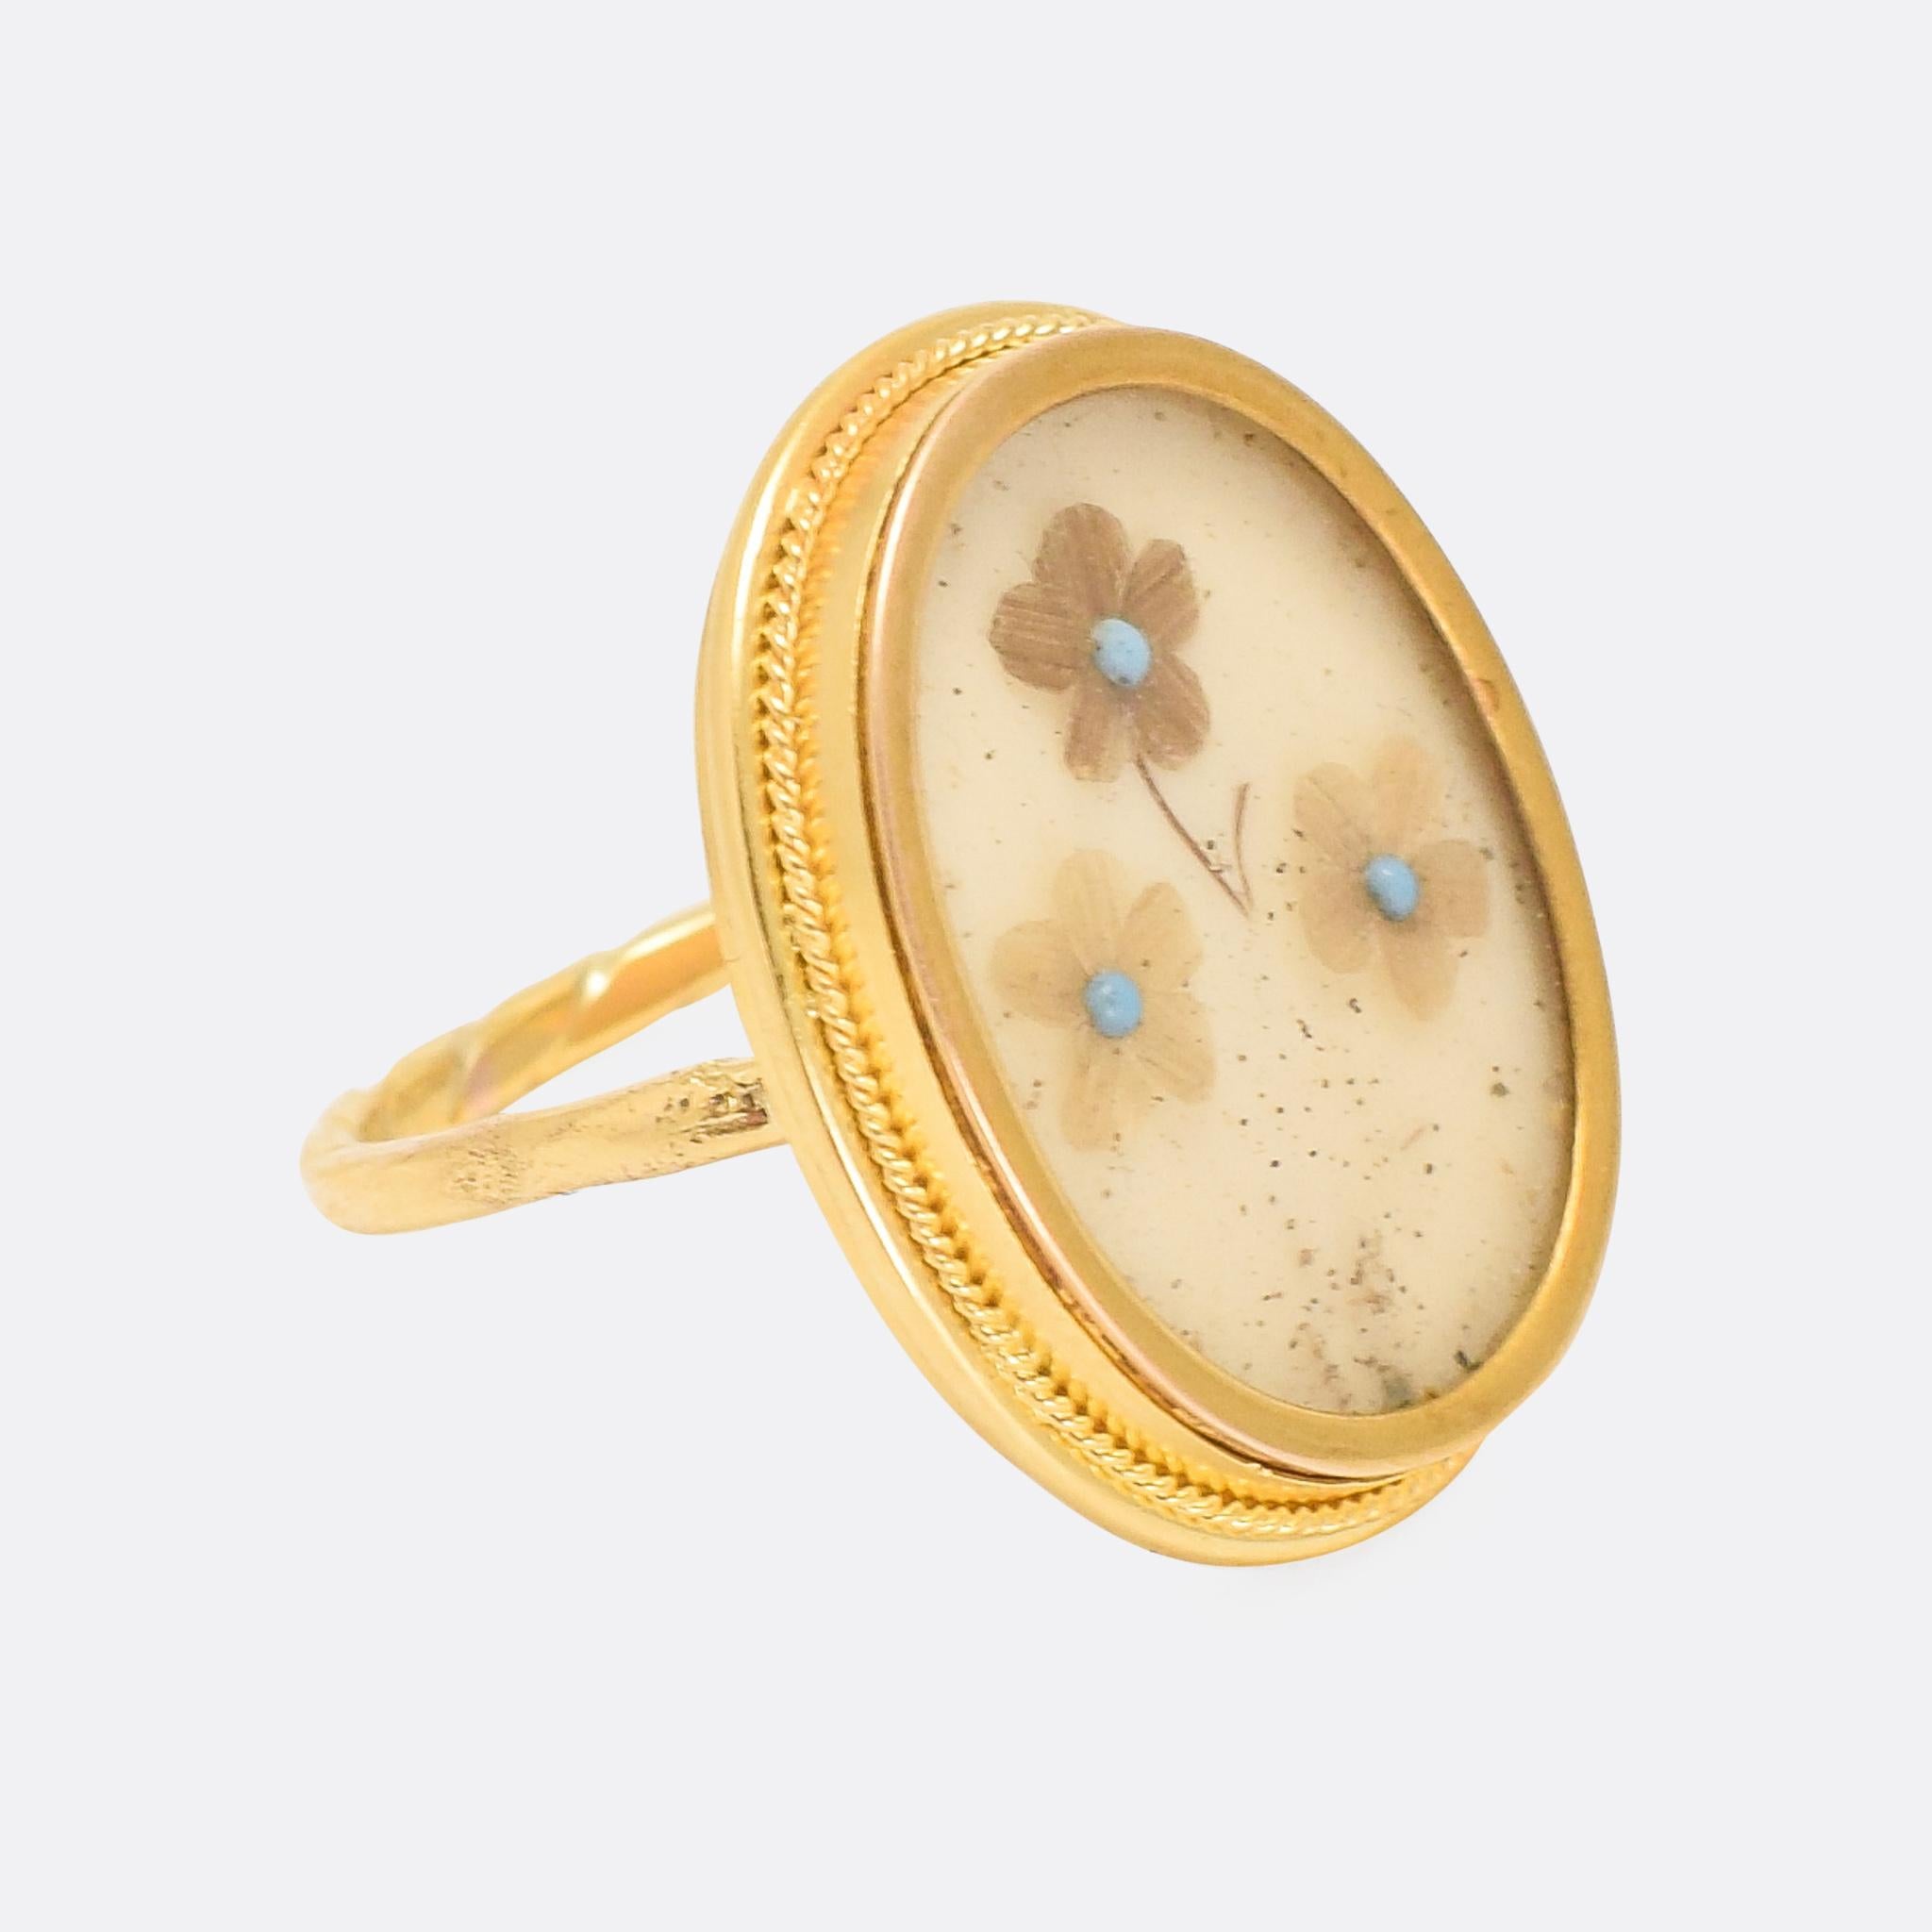 A weird and wonderful antique memorial ring dating from the mid Victorian era. Behind a glass panel are three forget-me-not flowers, with turquoise centres and hair-work petals. It's crafted in 18 karat gold, with a ropework trim around the head and